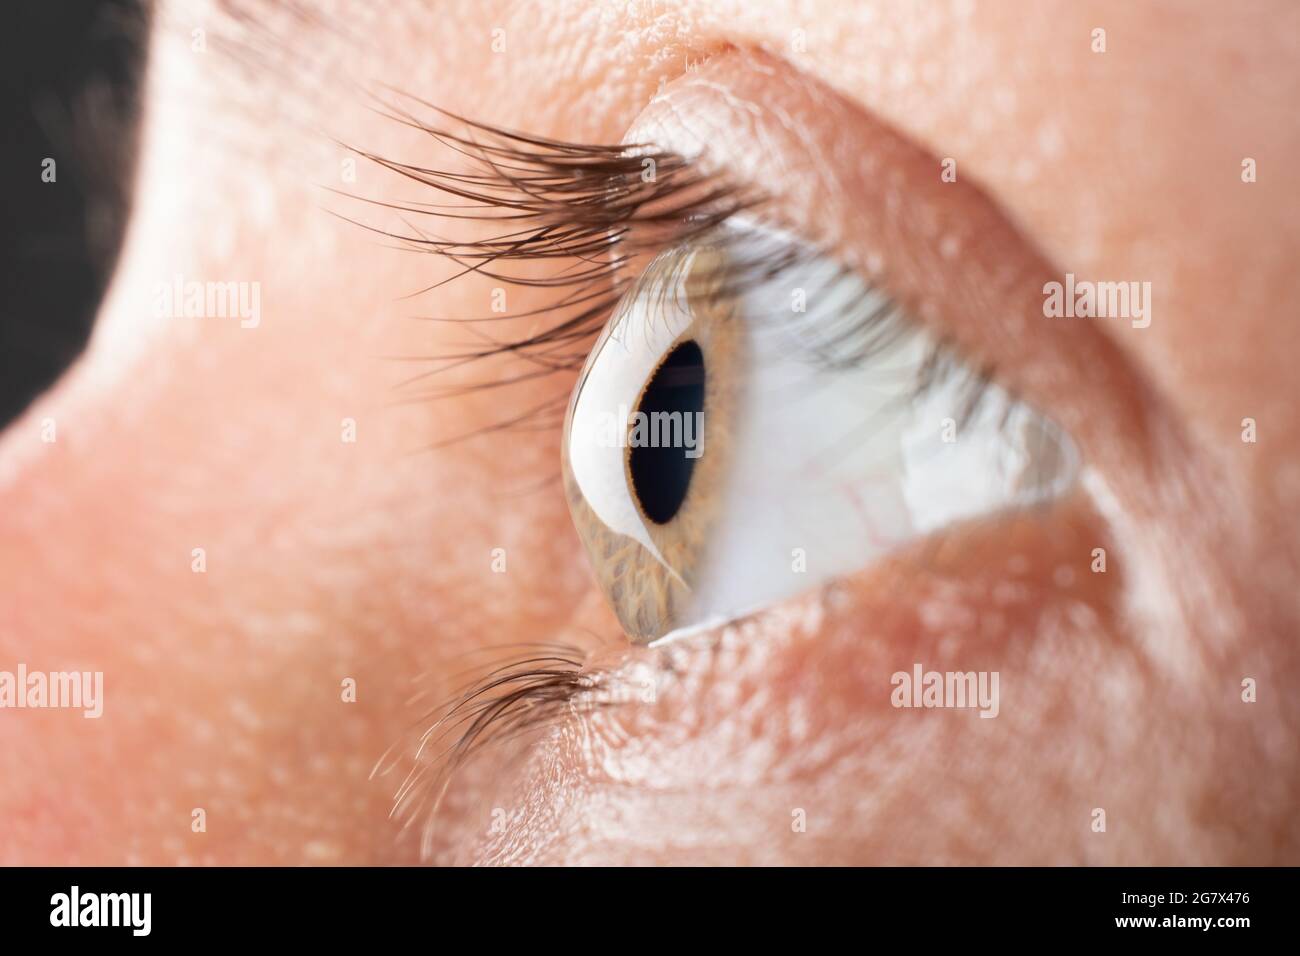 woman eye closeup with 3 stage of keratoconus, corneal dystrophy. Stock Photo